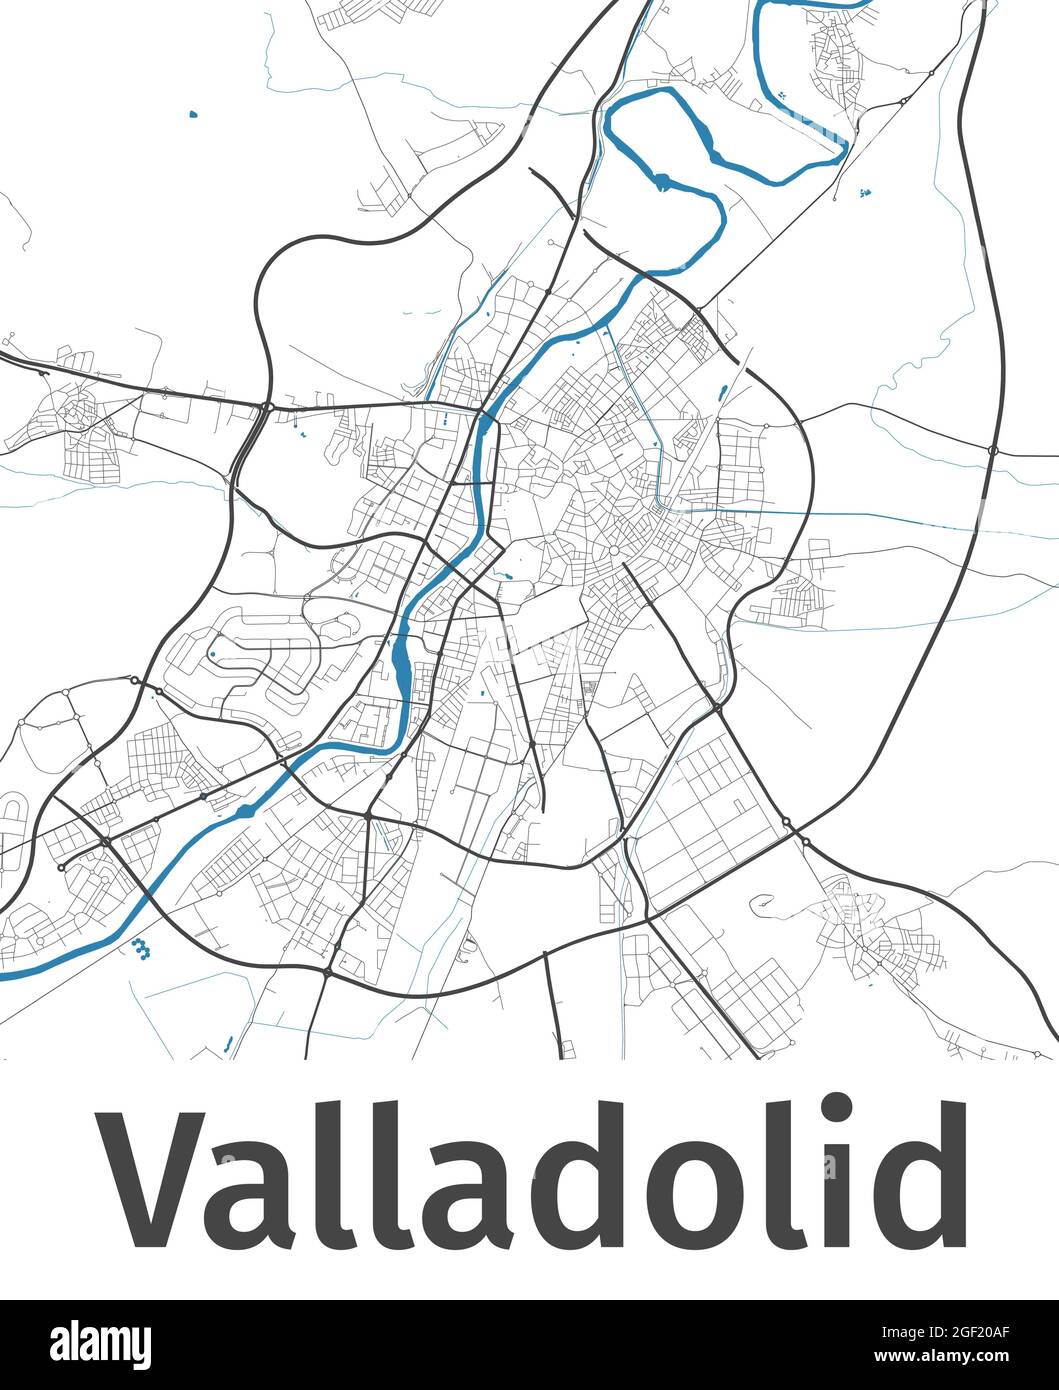 Valladolid map. Detailed map of Valladolid city administrative area. Cityscape panorama. Royalty free vector illustration. Outline map with highways, Stock Vector